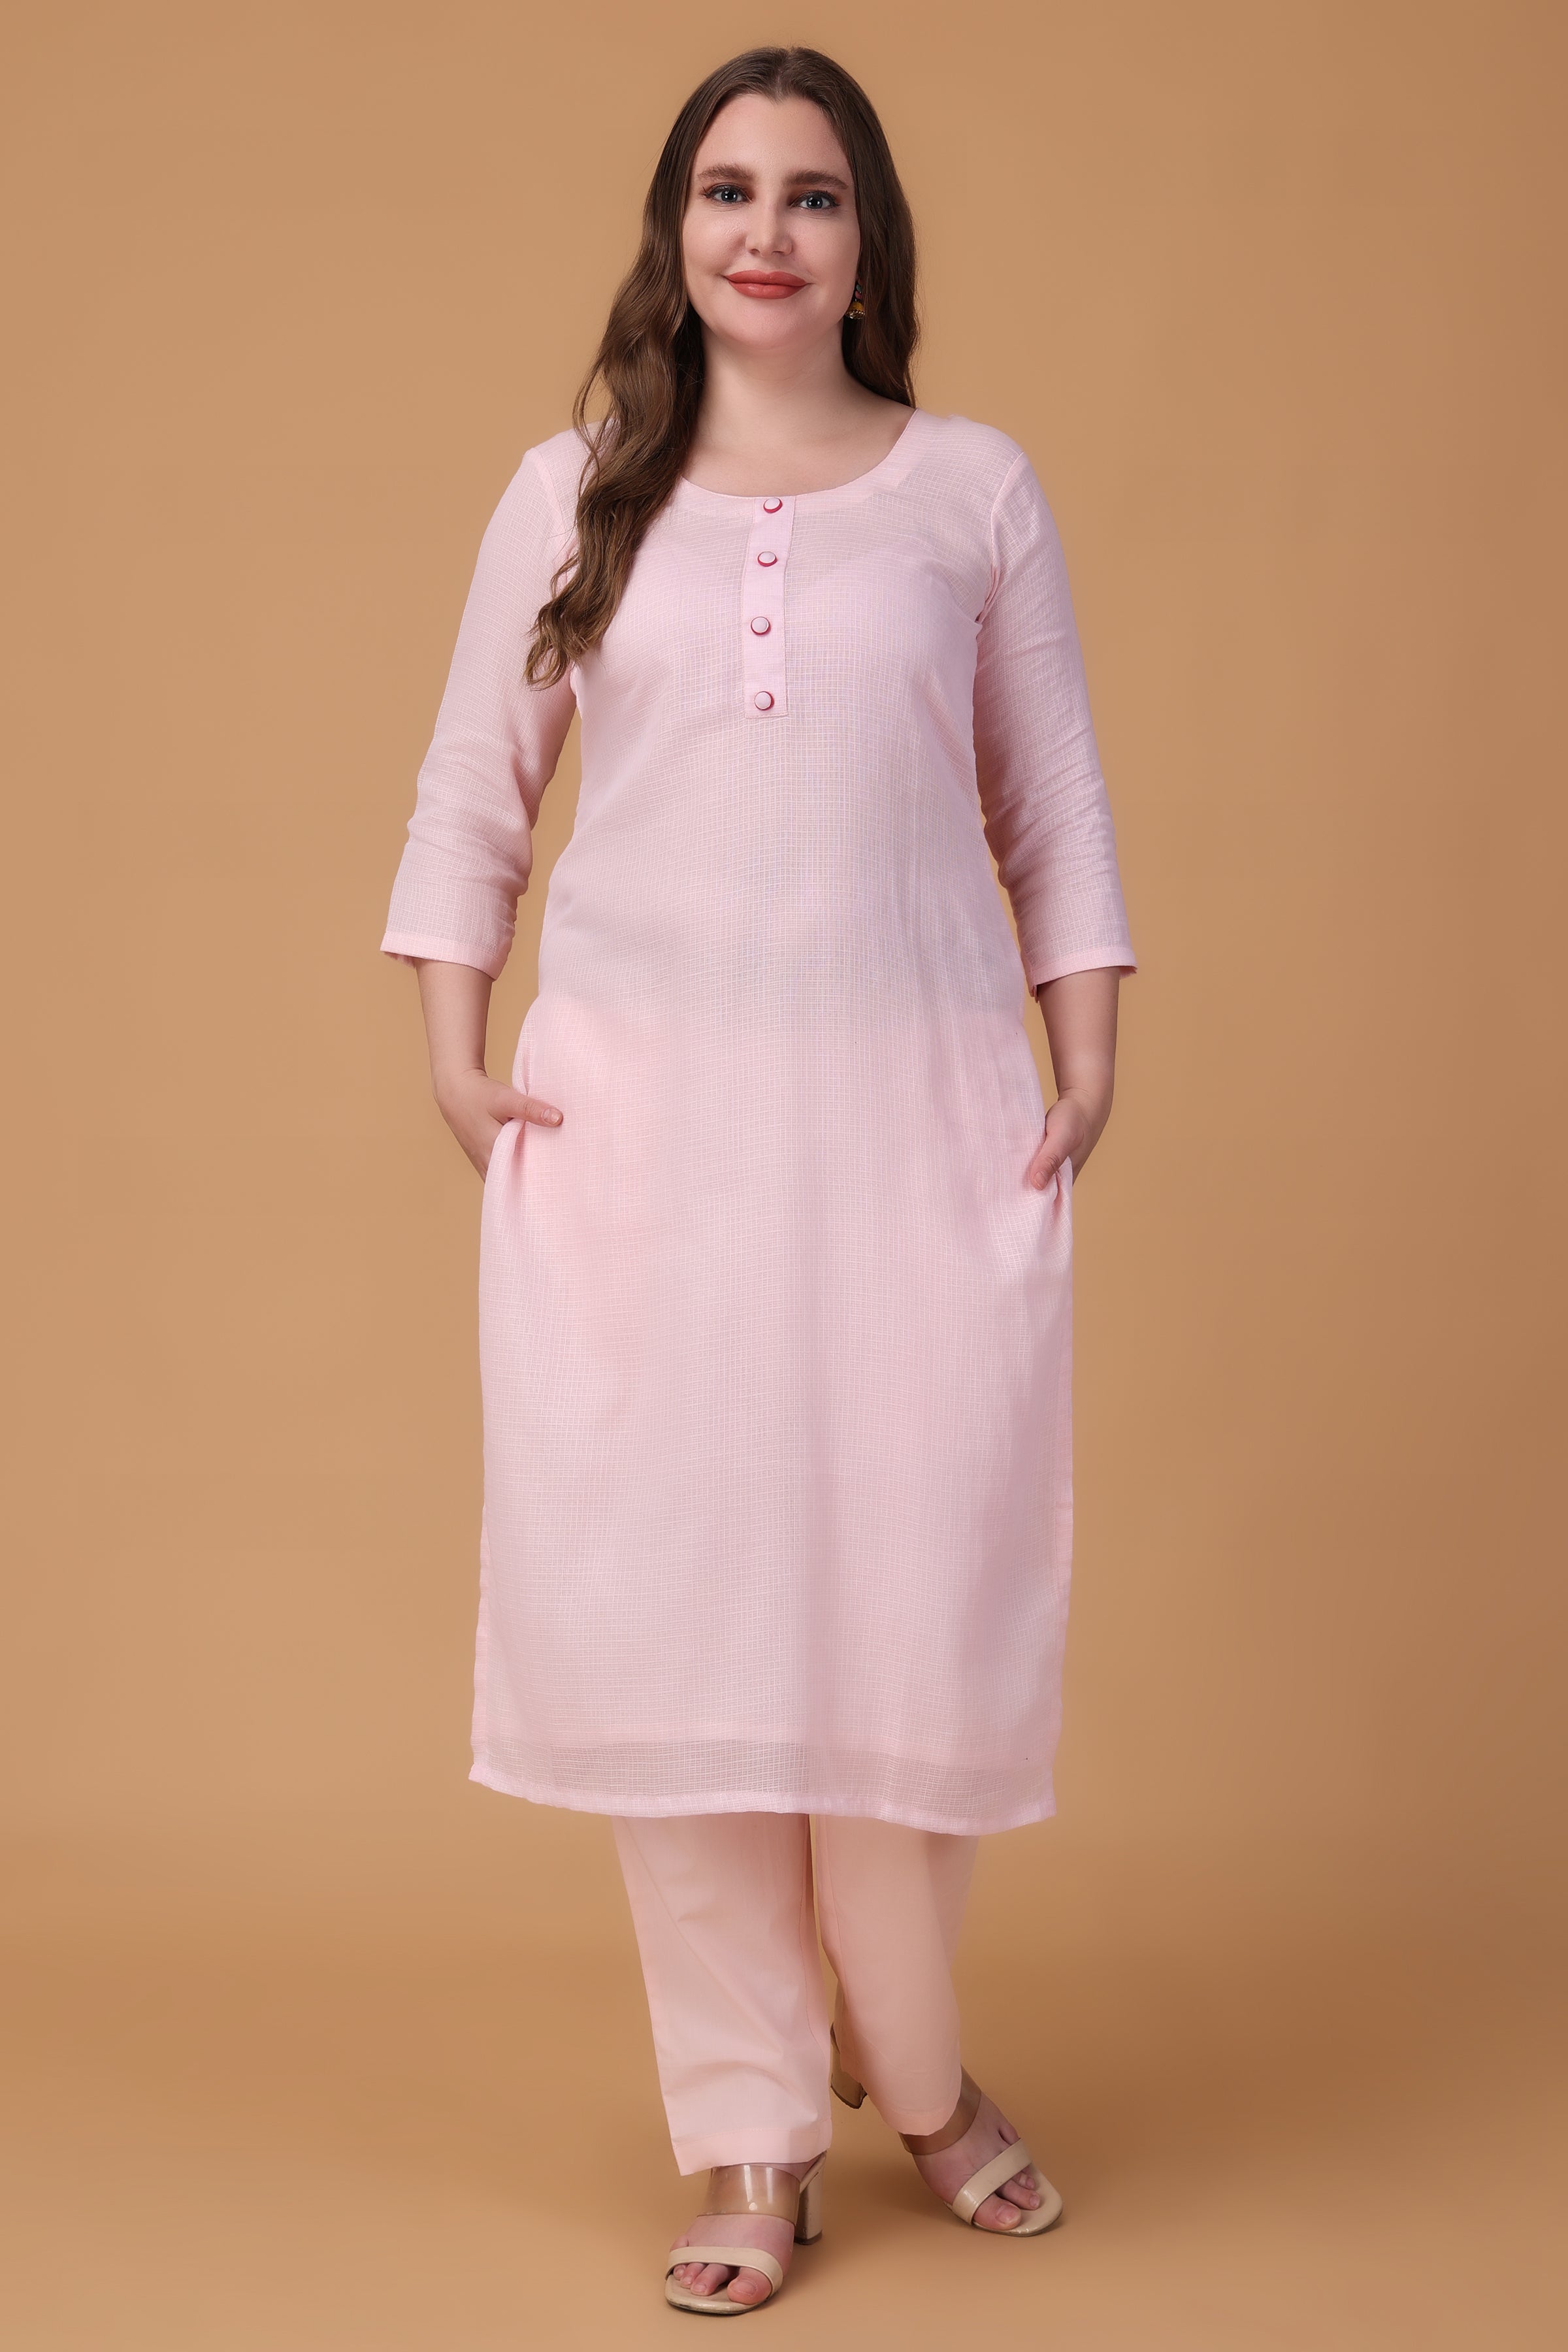 Buy Stylish Cotton Kurtas For Women Online In India At Discounted Prices